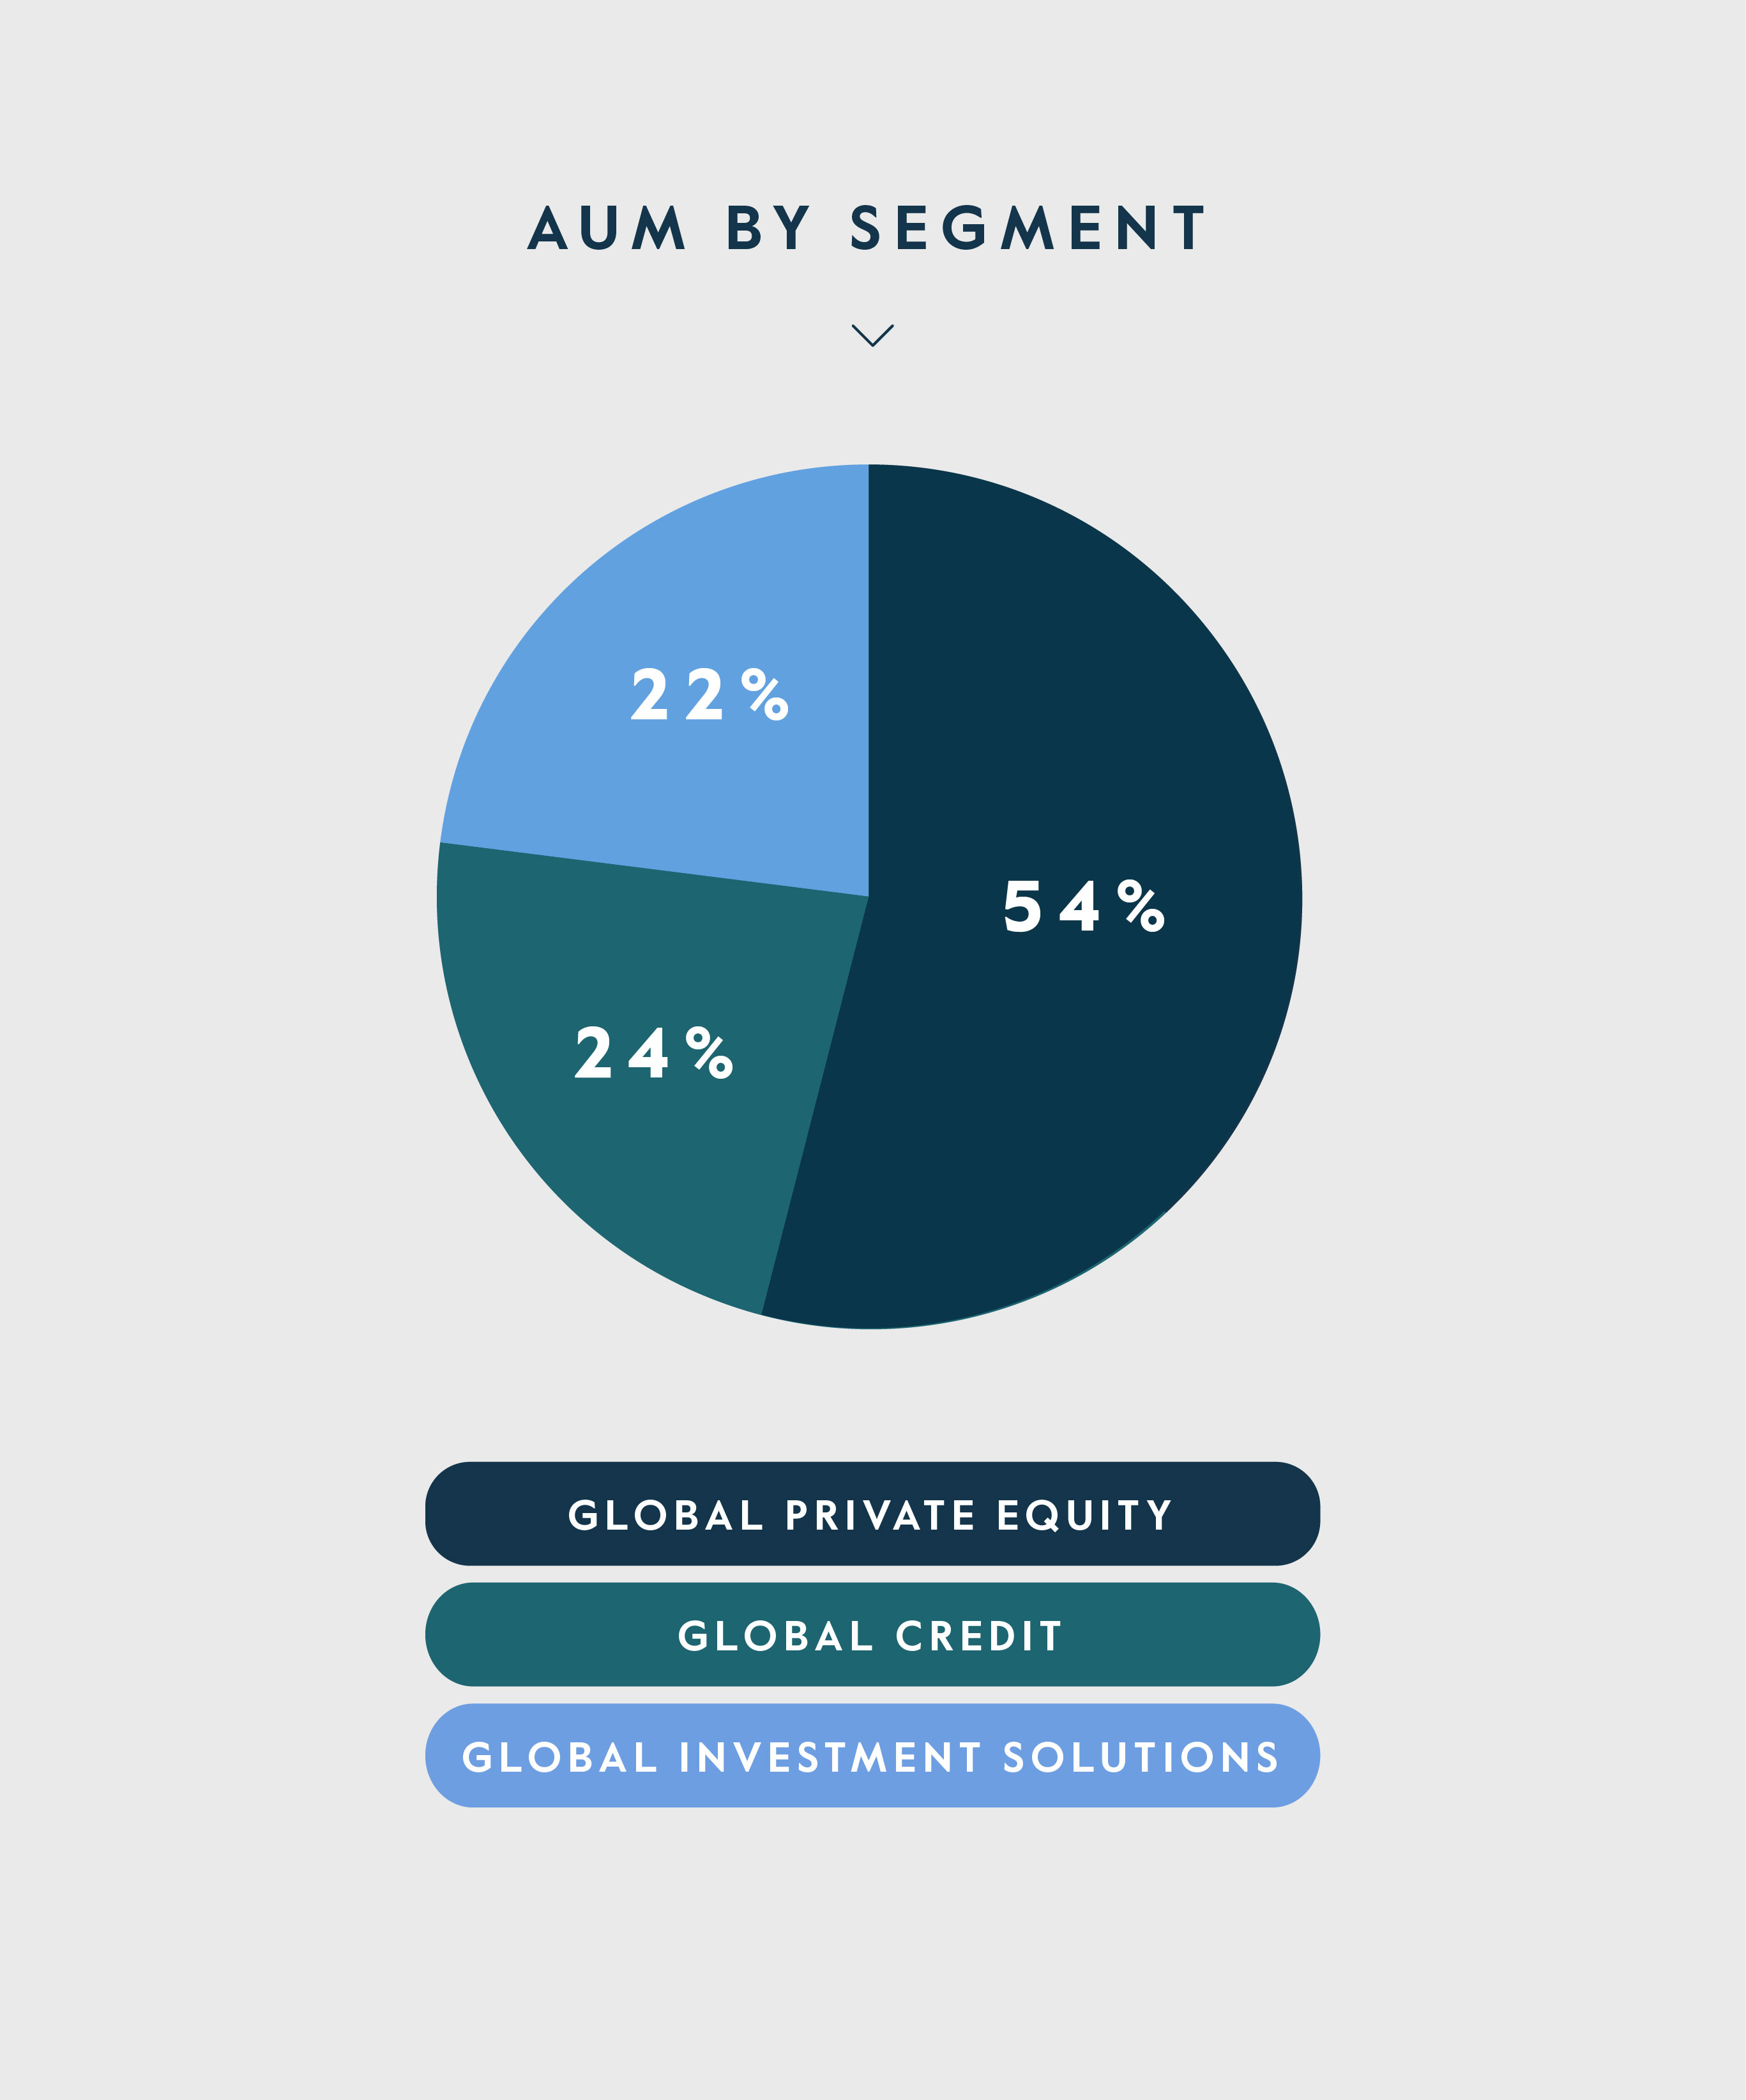 Aum by Geography